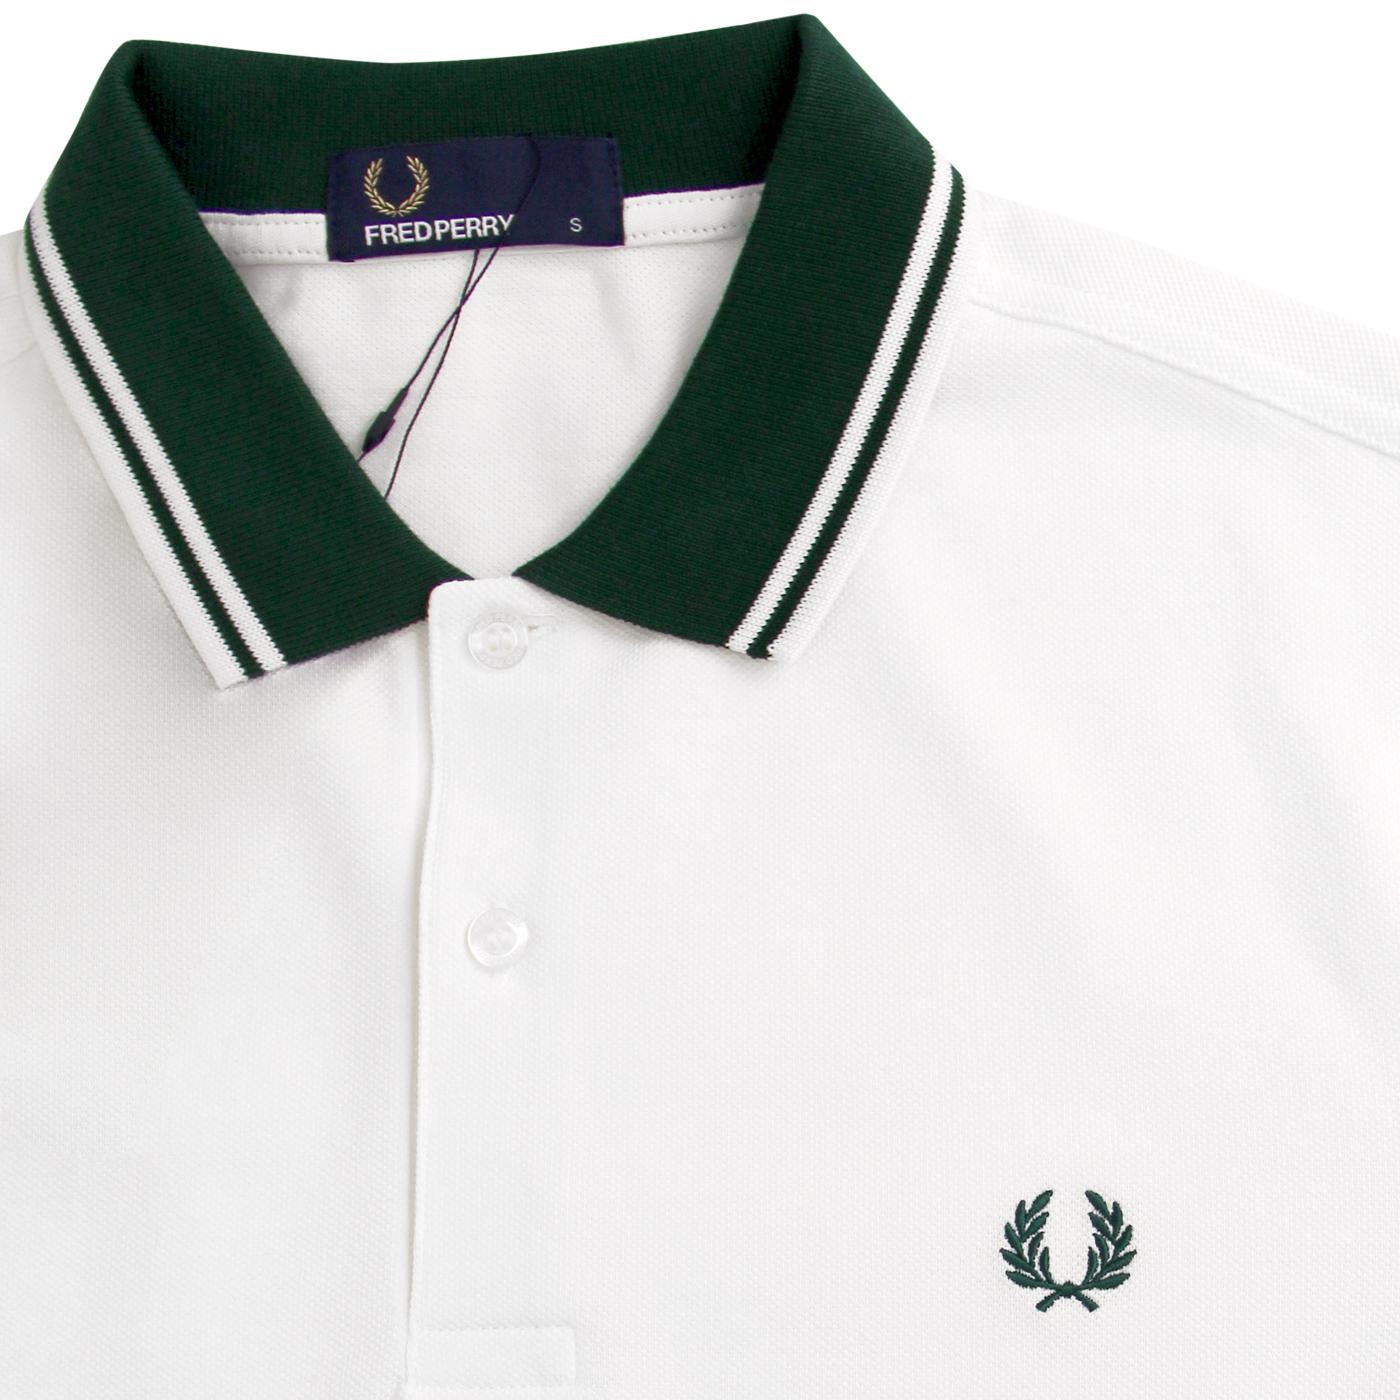 FRED PERRY Contrast Twin Tipped Mod Polo Top Snow White